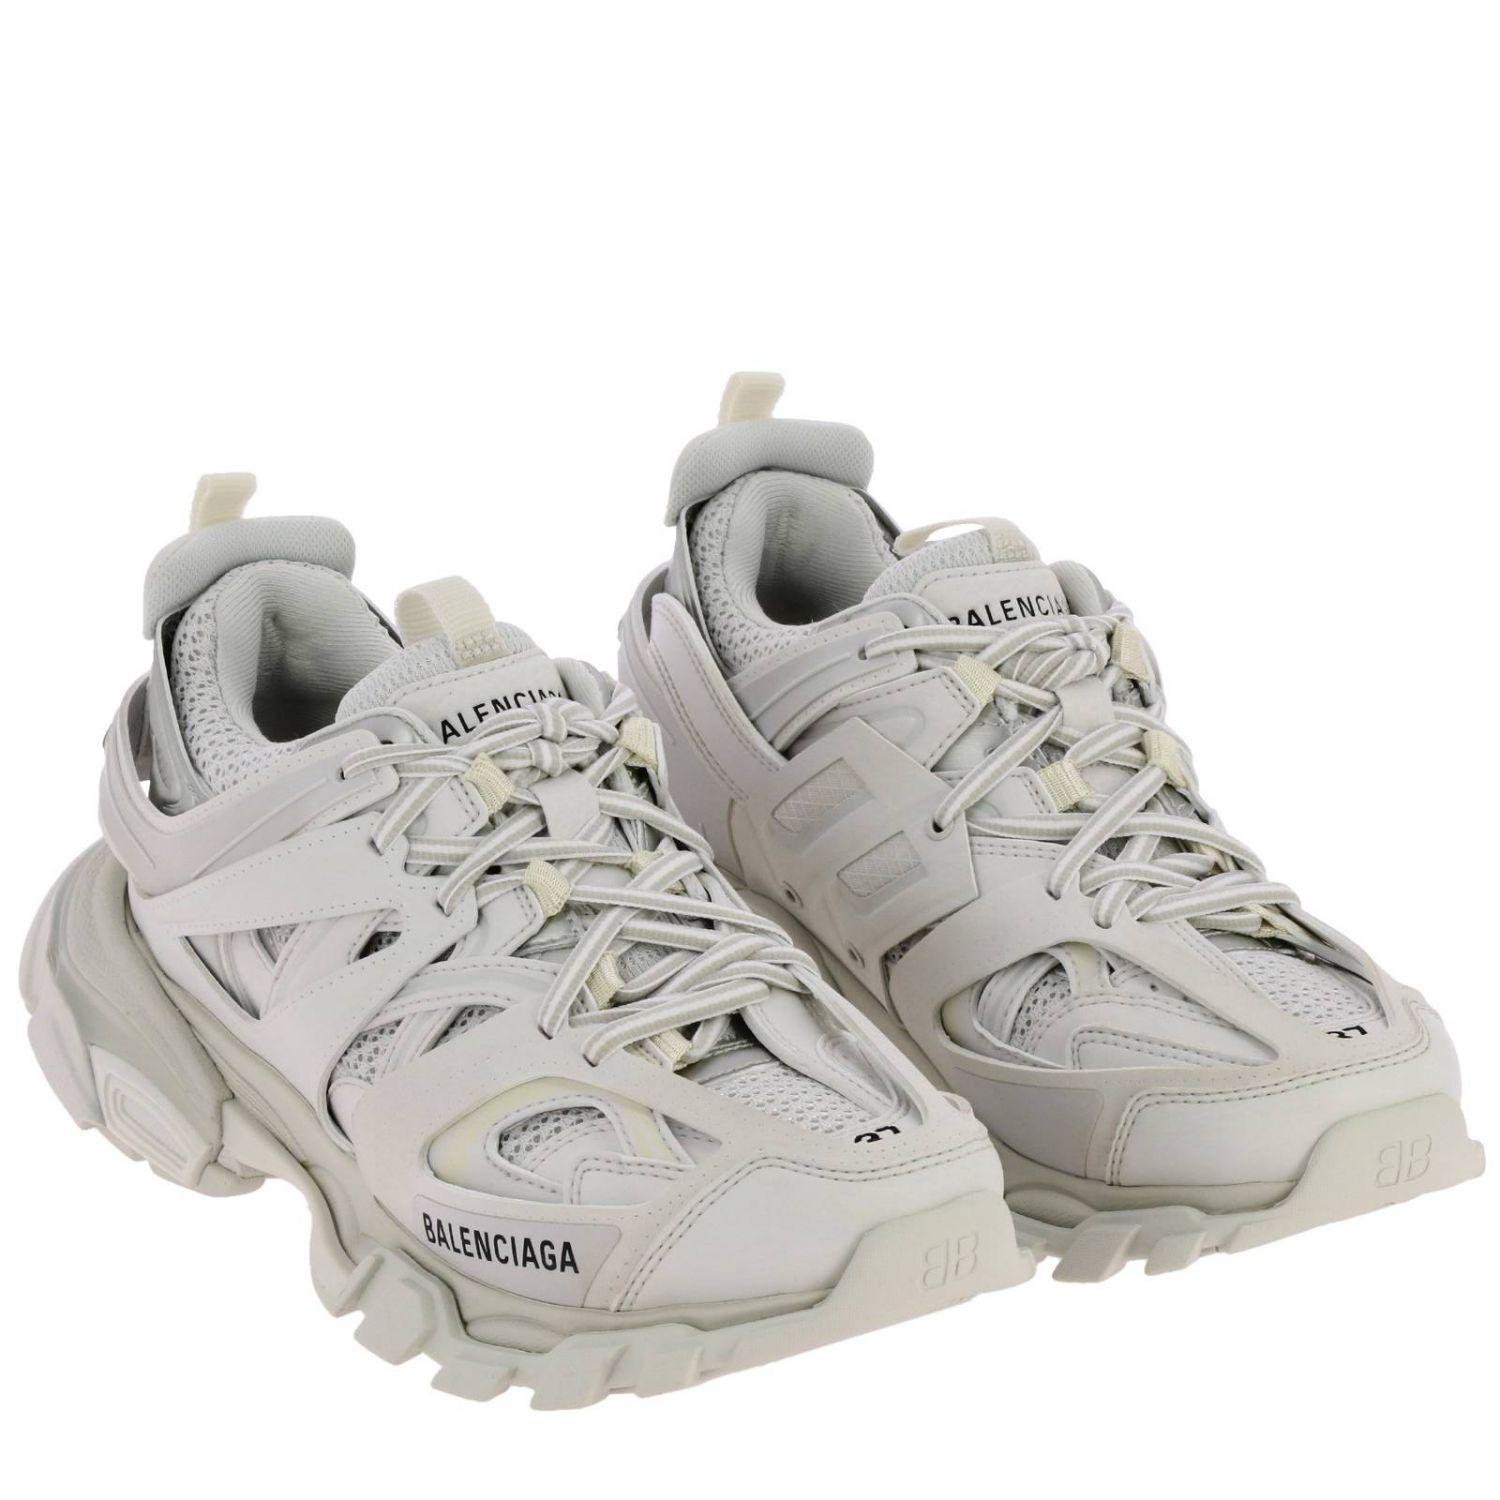 Balenciaga Synthetic Track.2 Mesh And Nylon Trainers in White/Black (White)  - Save 61% - Lyst